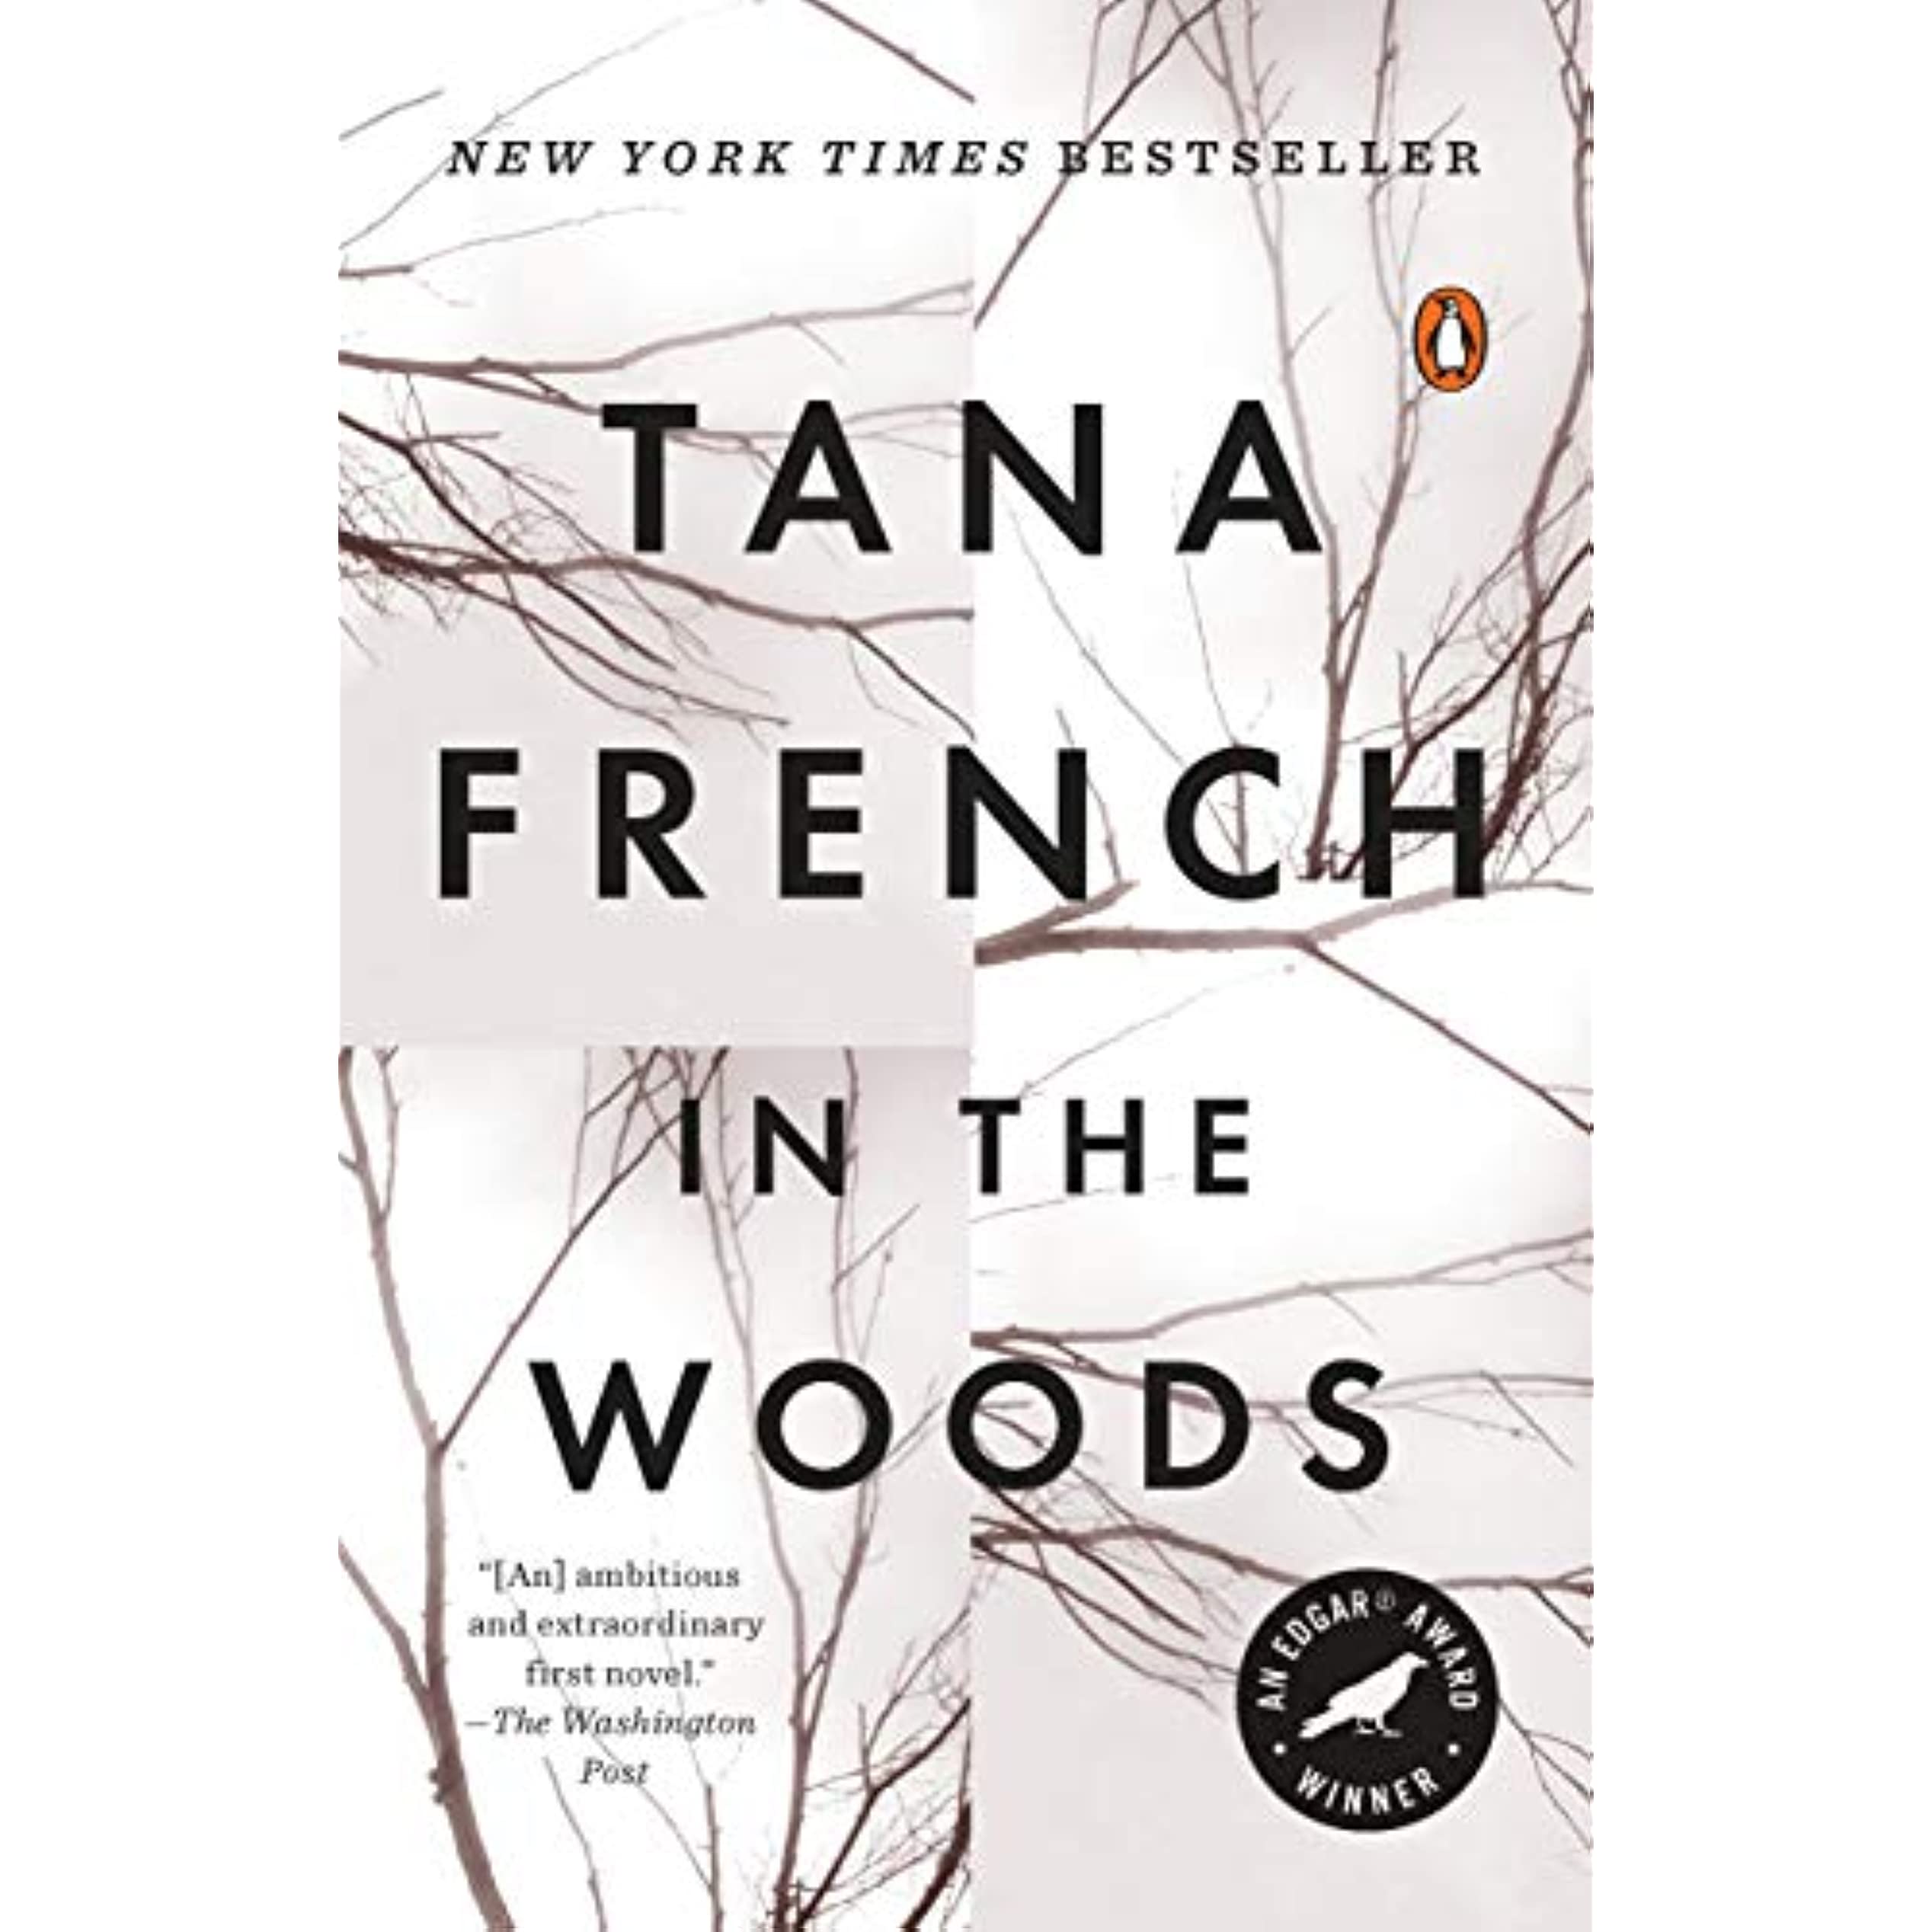 In the Woods book jacket